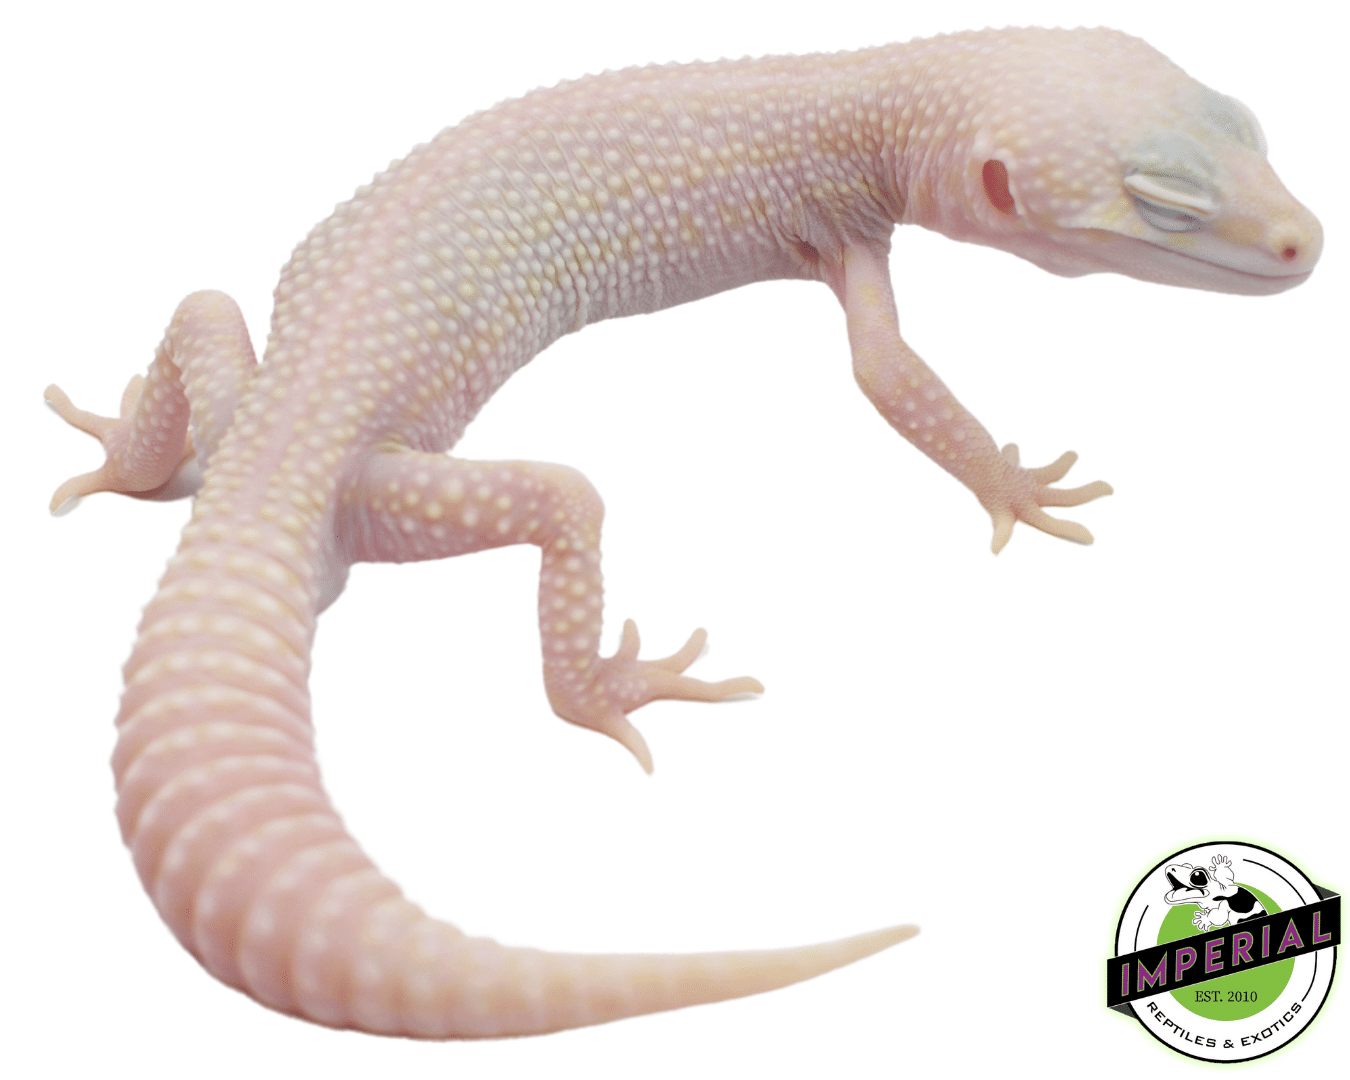 Super Snow Albino Eclipse Leopard Gecko Adult For Sale - Imperial 